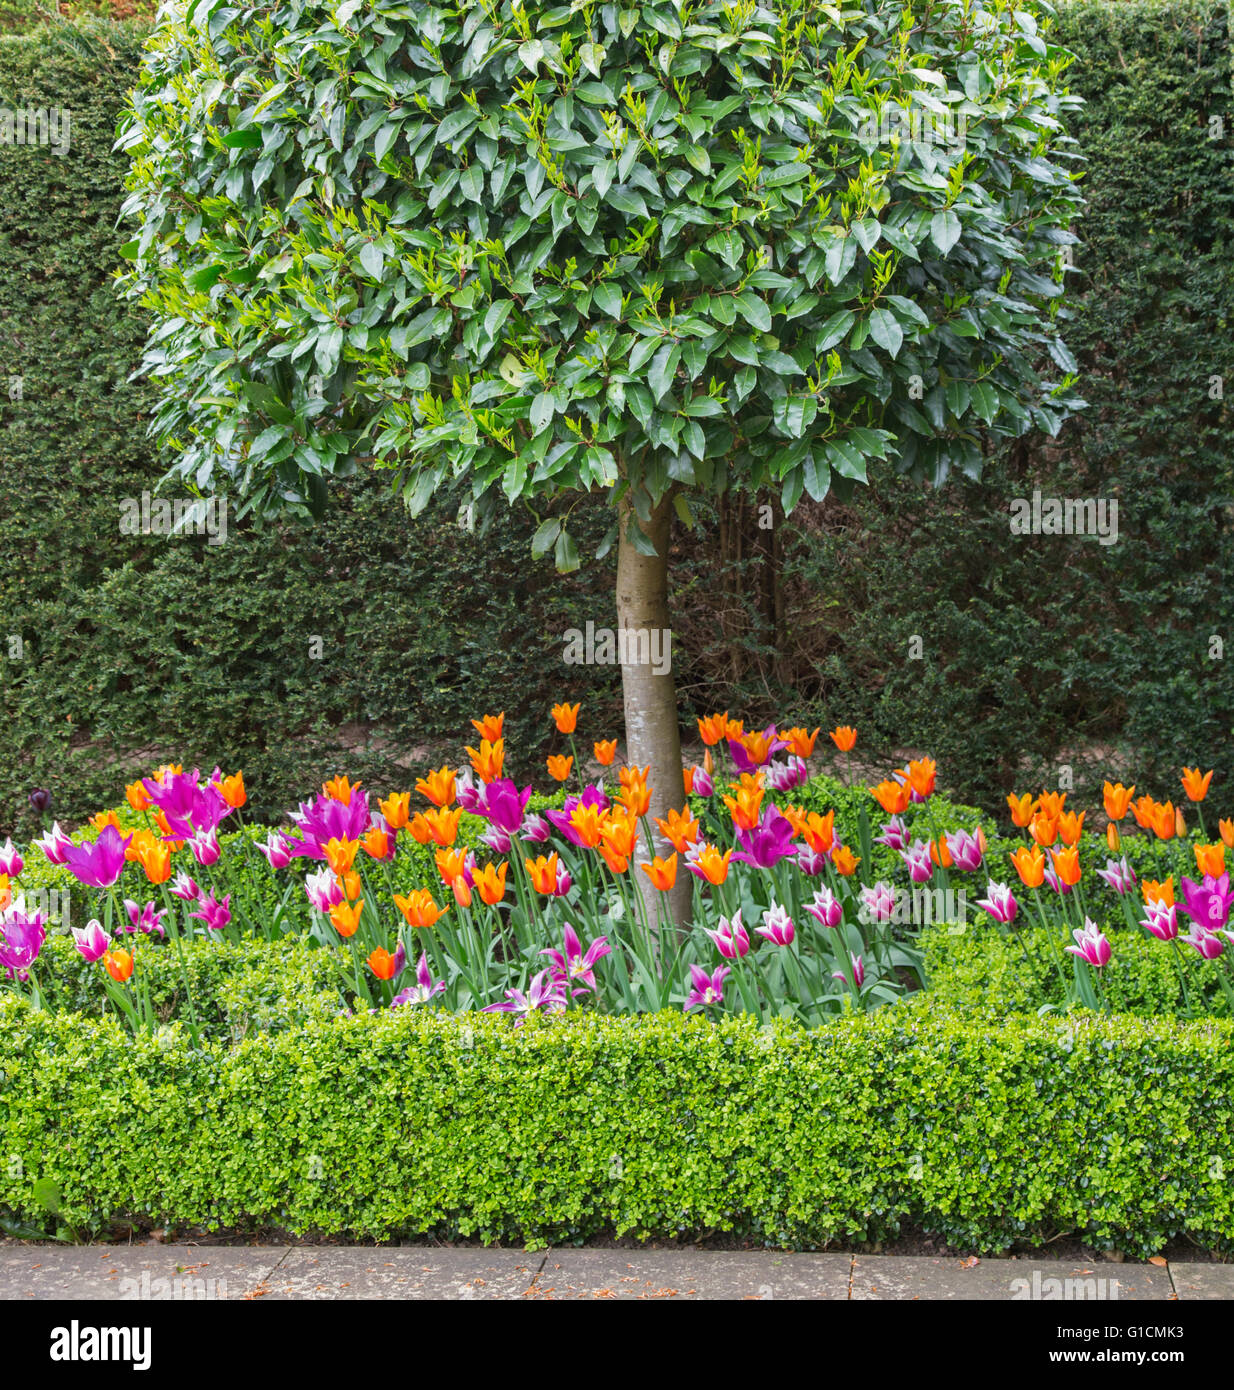 Colorful Tulips in a garden boarder with Box hedging, England, UK Stock Photo